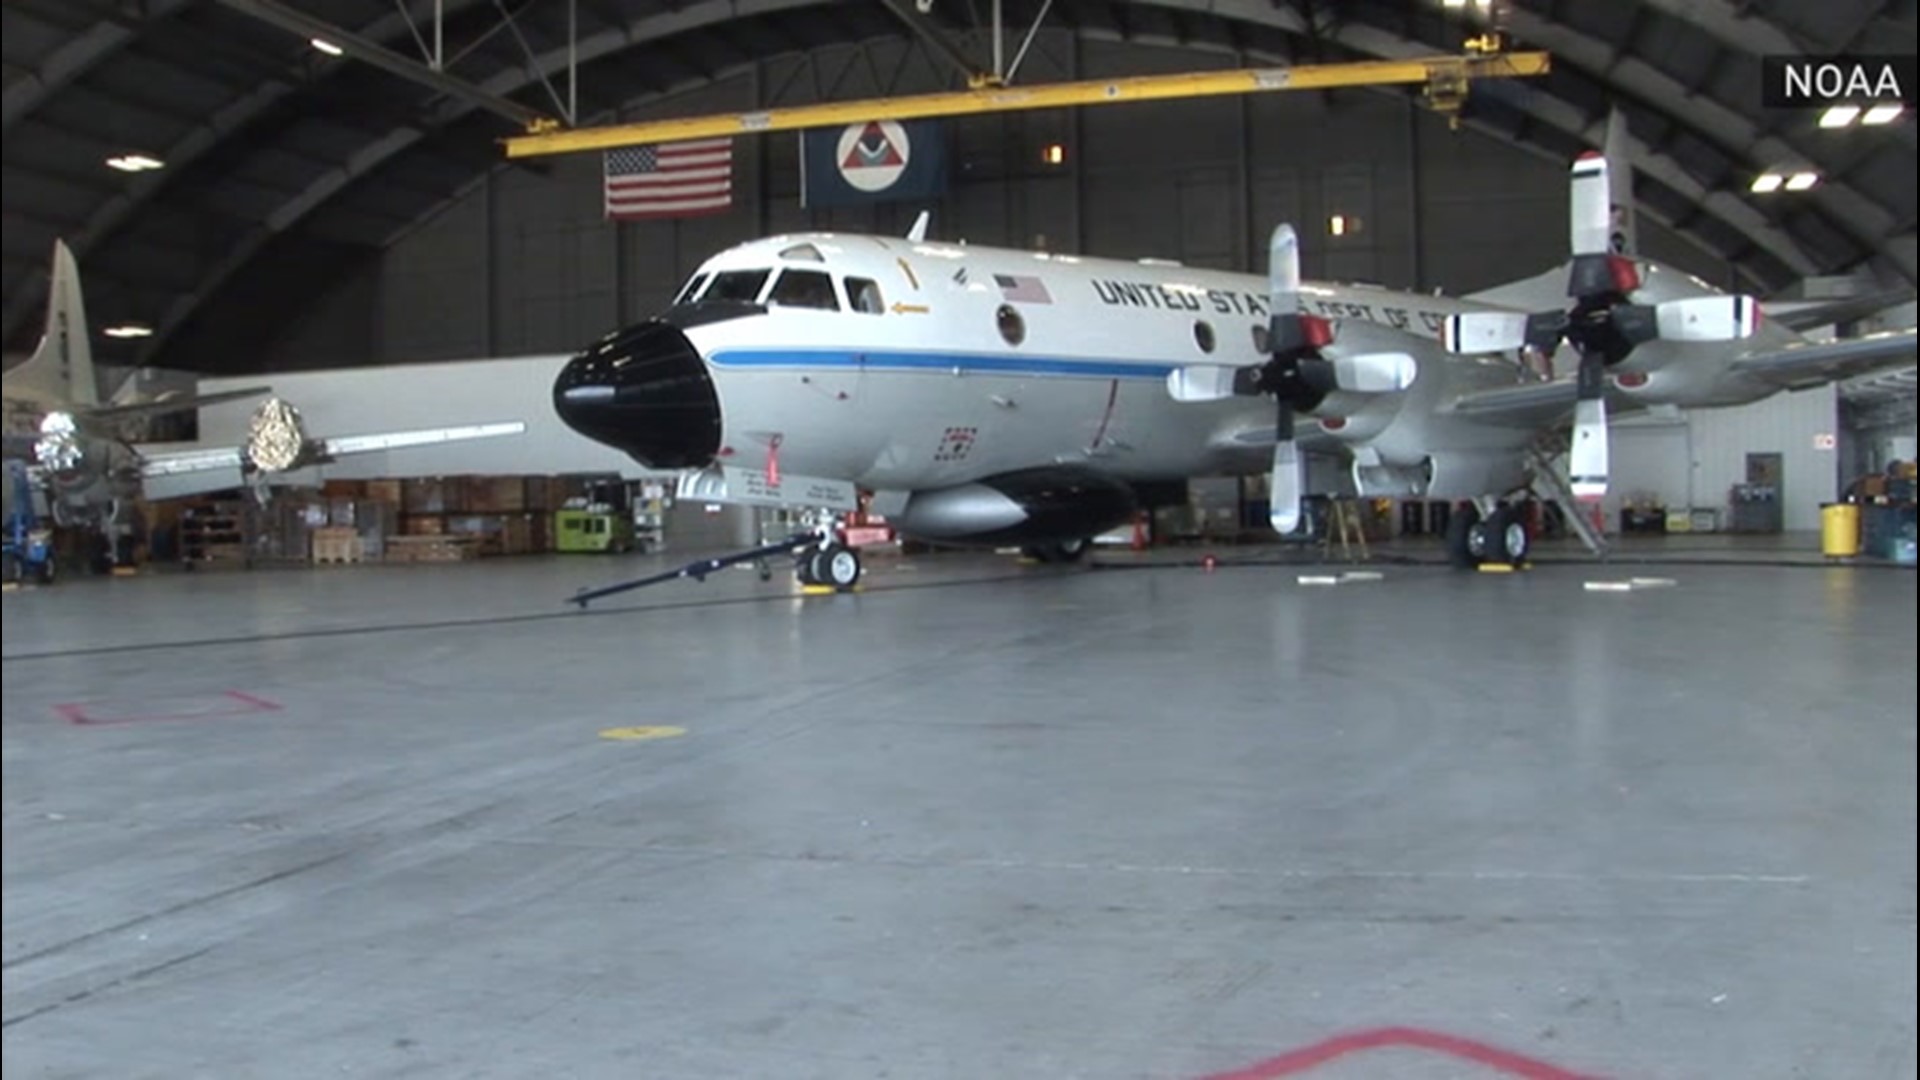 When there's a hurricane or tropical storm approaching, you can expect 'hurricane hunters' to fly directly into the storm. They do this to gather crucial data of the storm to help with forecasting and provide warnings to the public.